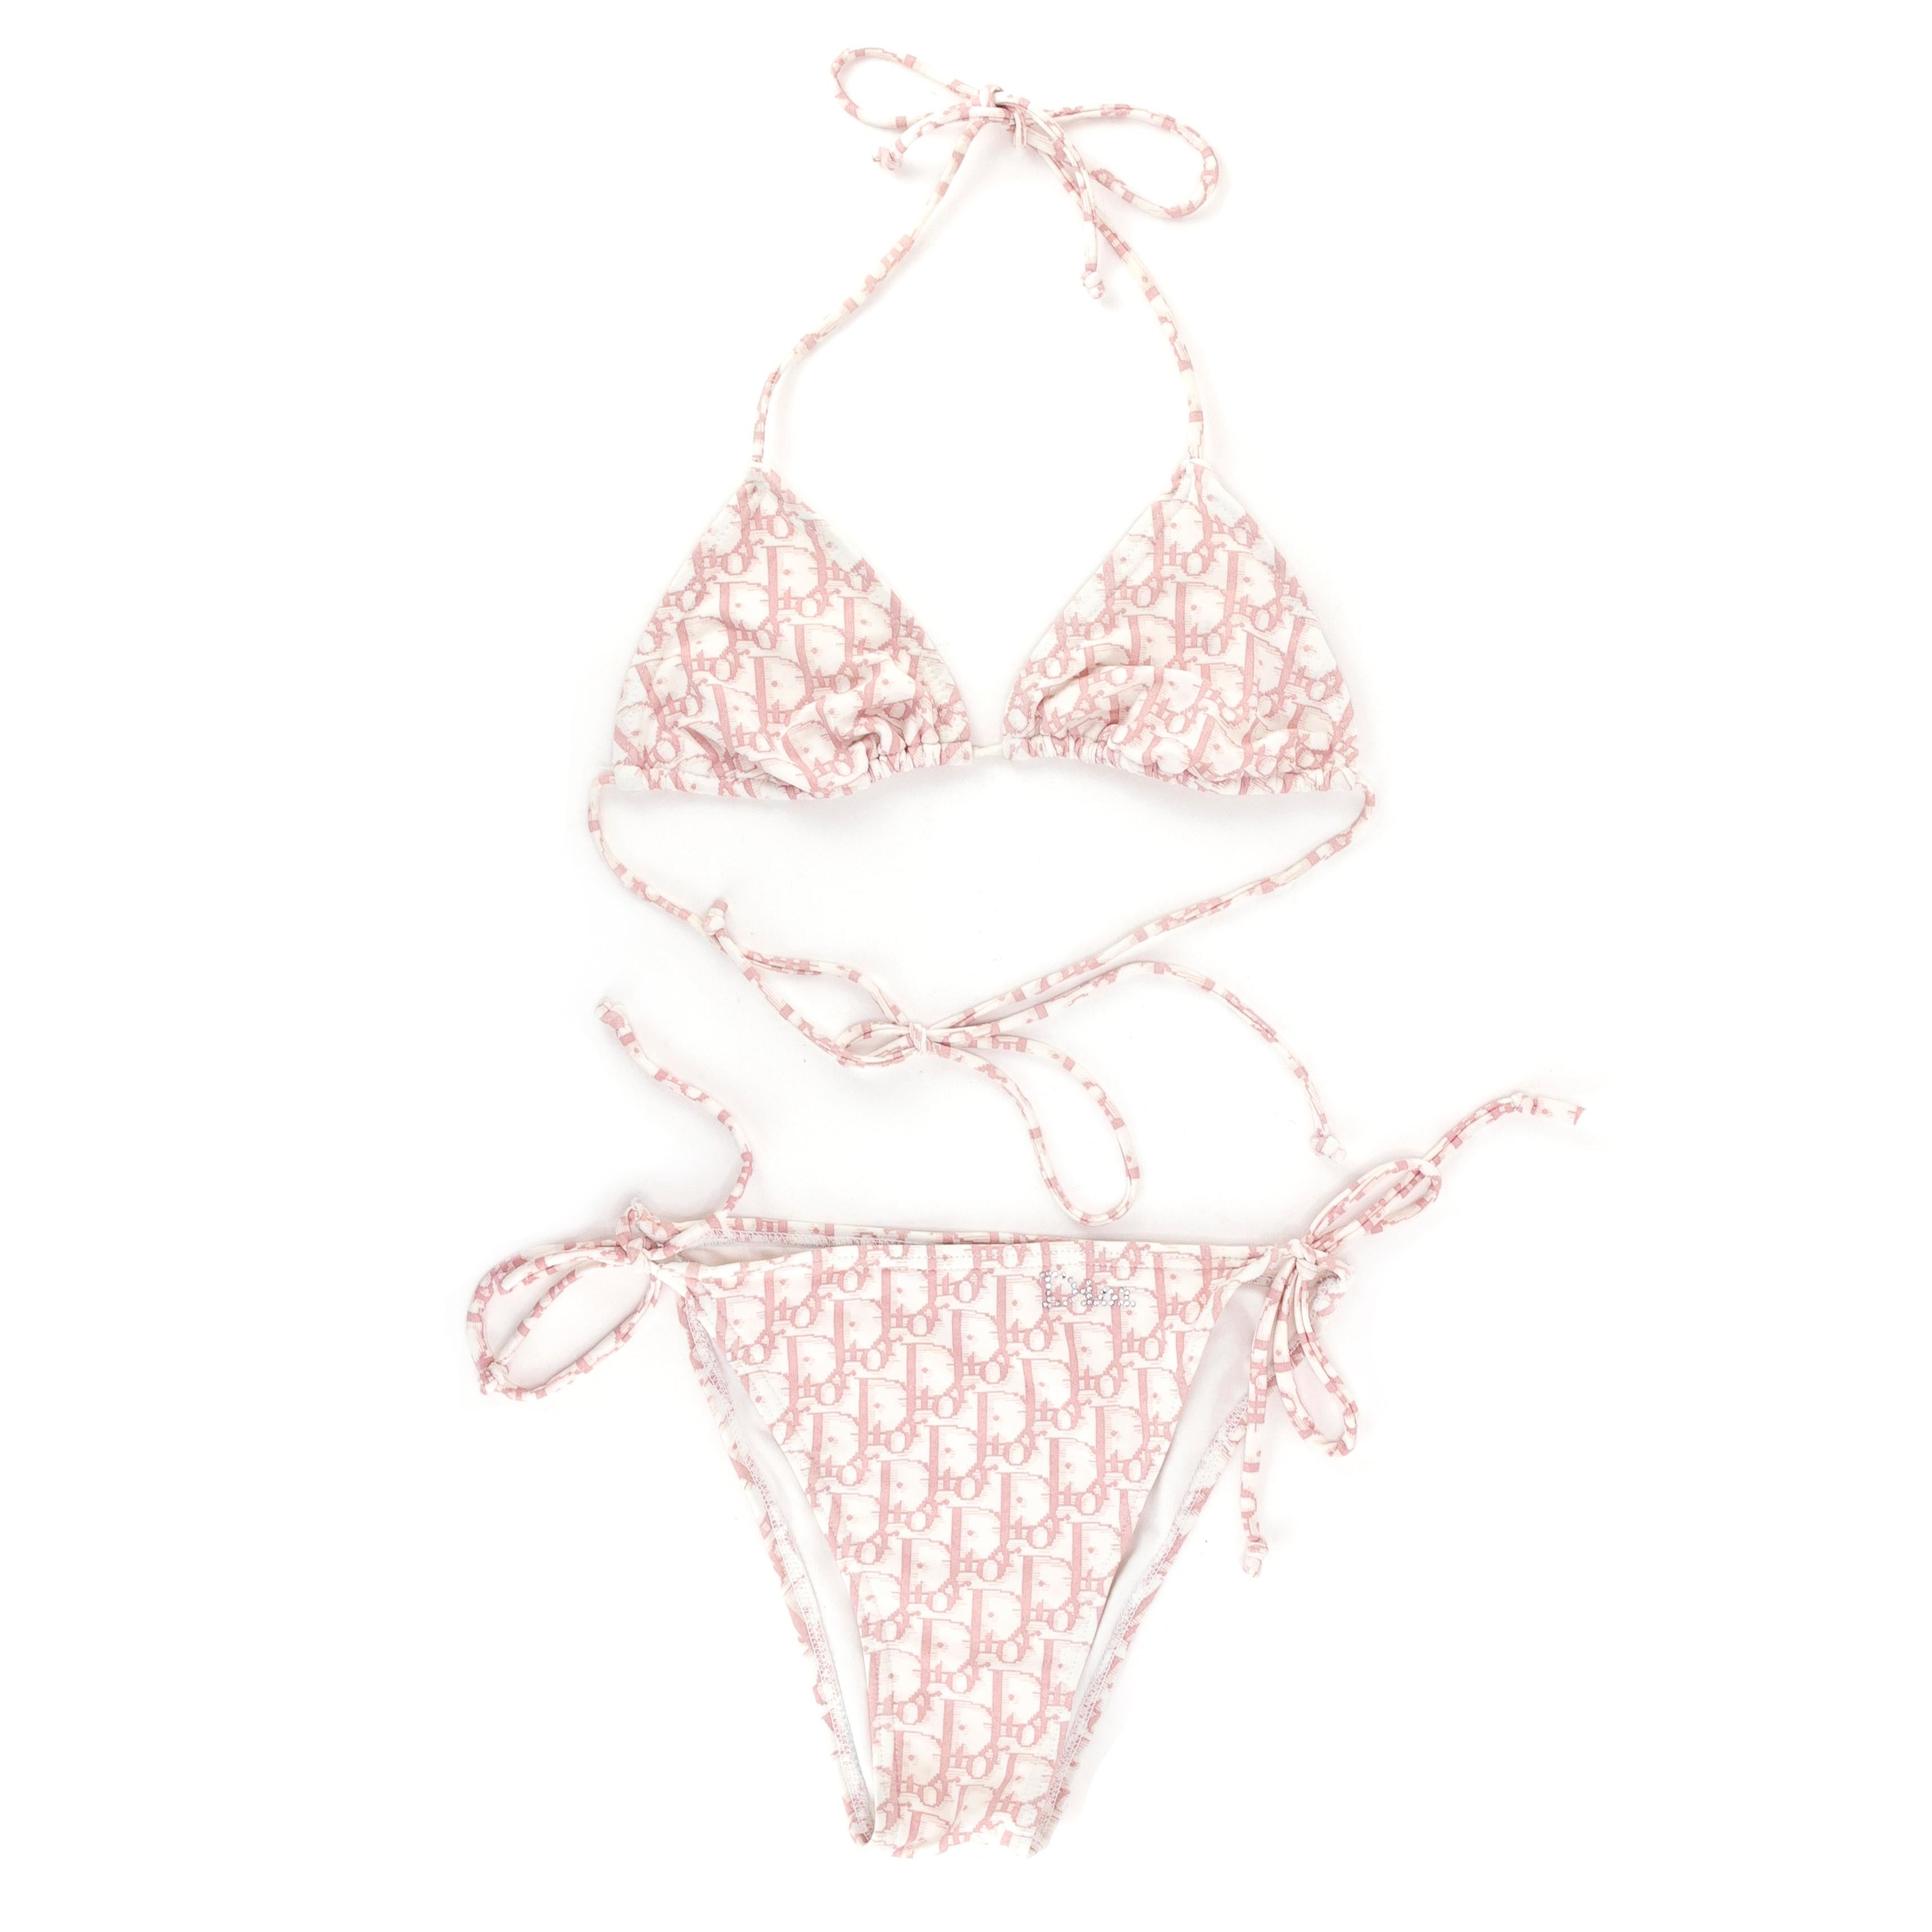 RARE Christian Dior by John Galliano two-piece swimsuit / bikini in the iconic Diorissimo oblique monogram color pink and white, crystal embellished Dior logo, from 2003/2004 spring/summer collection. Size M.

Condition:
Really good.